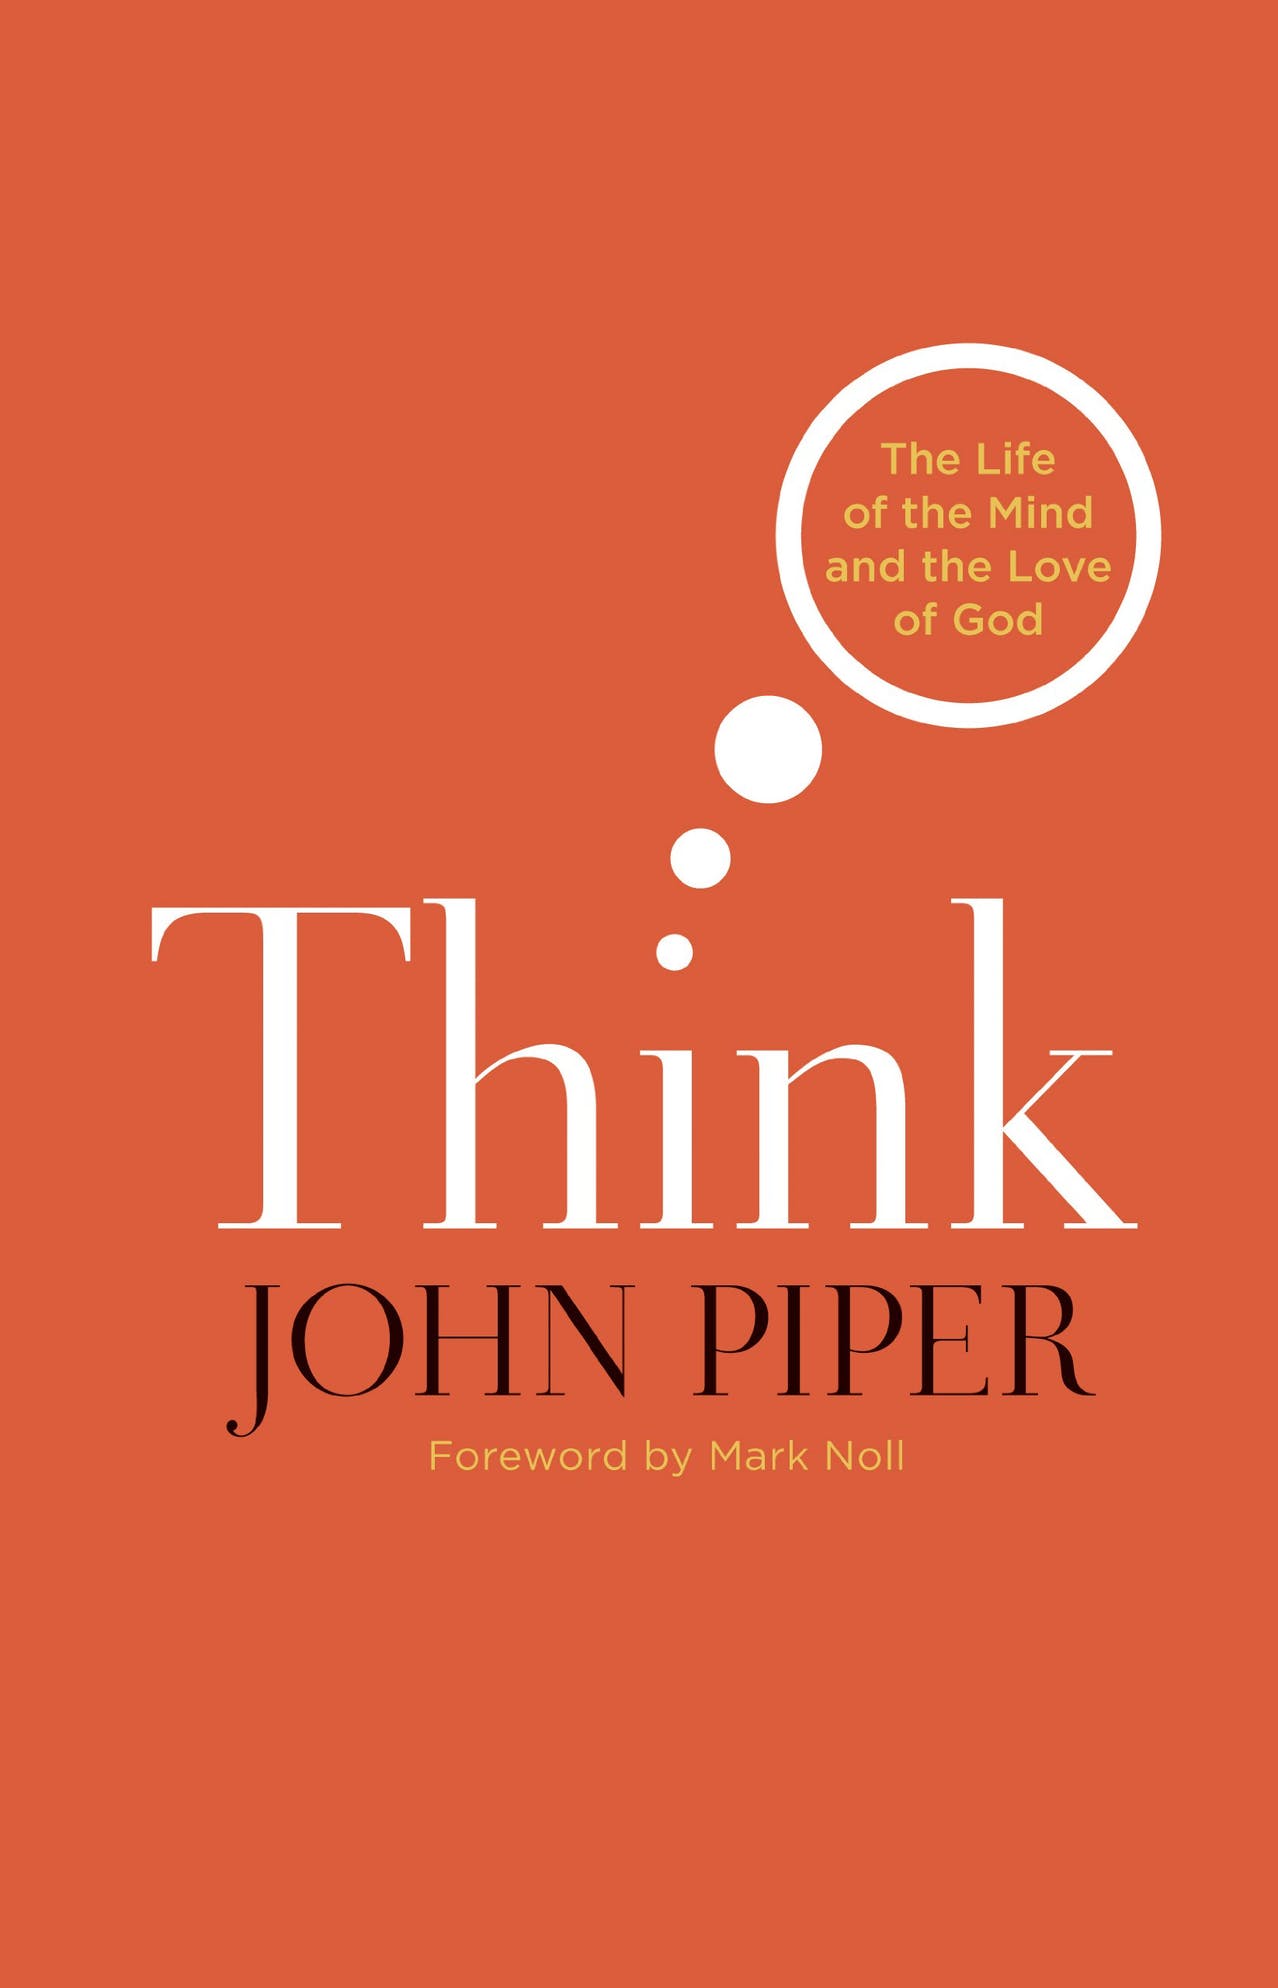 DOWNLOAD PDF: Think! by John Piper 18